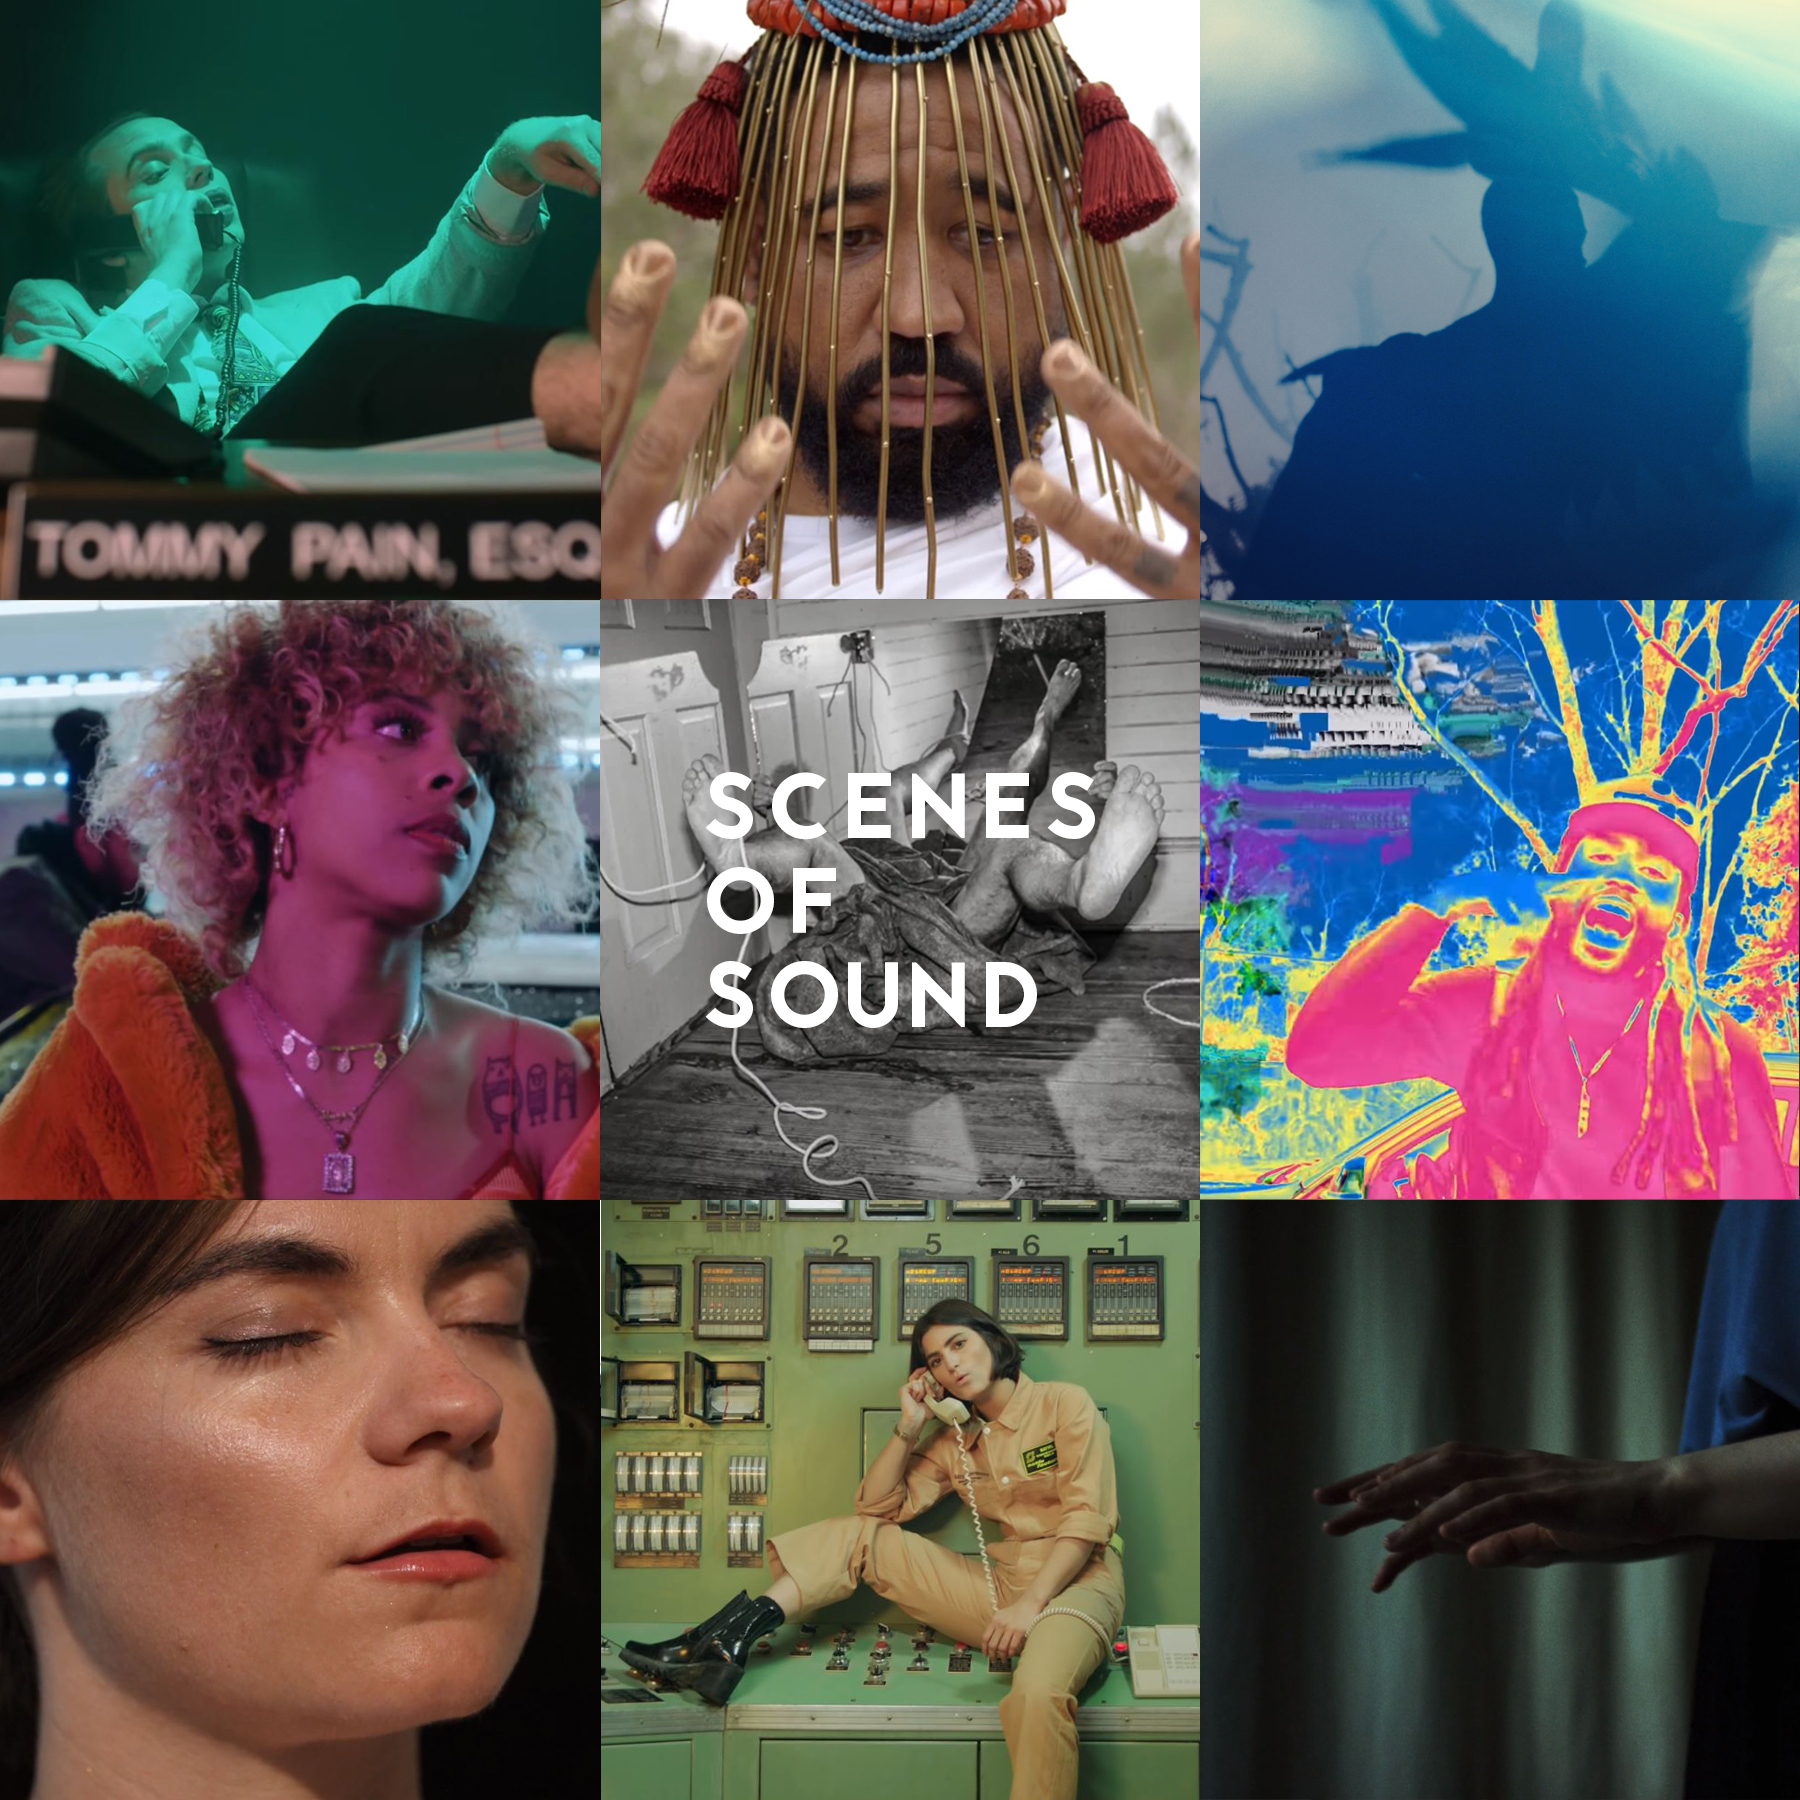 Scenes of Sound - July 14, 2019